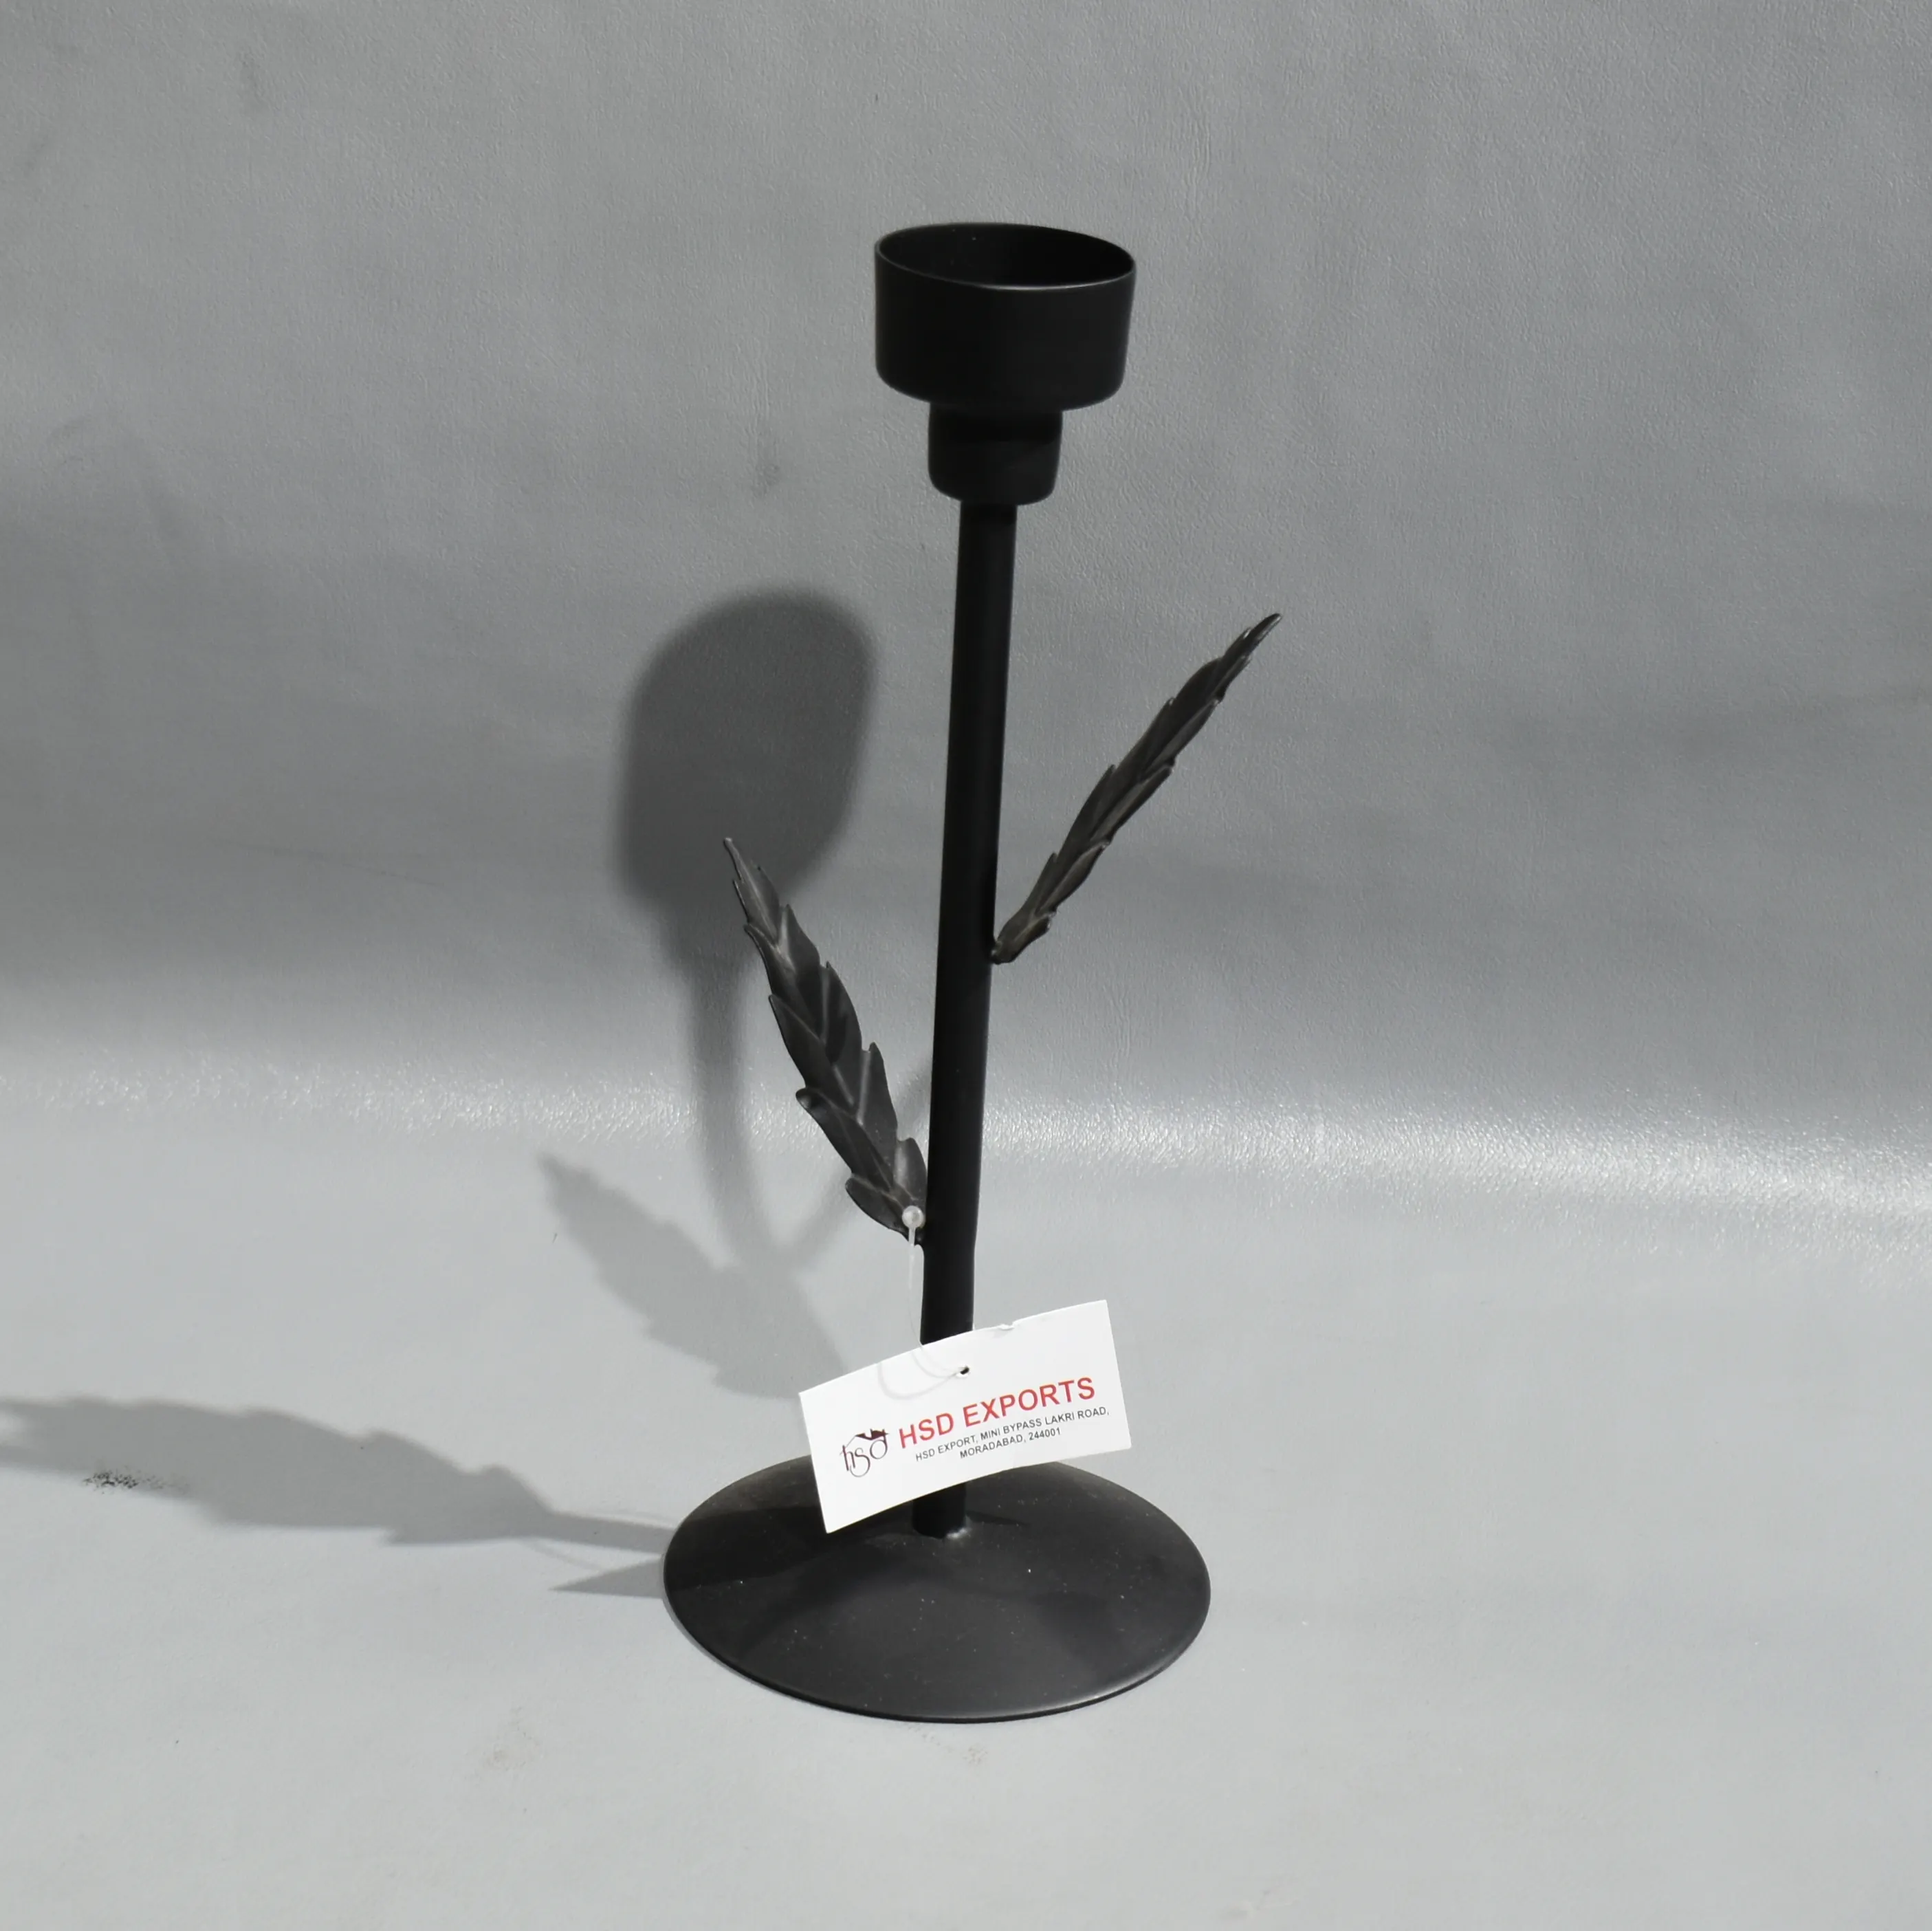 Hot Selling Iron Wire Stick leaf design Candle Holder Matt Black Colour Small Size Candle Holder And Candle Stand For Home Deco